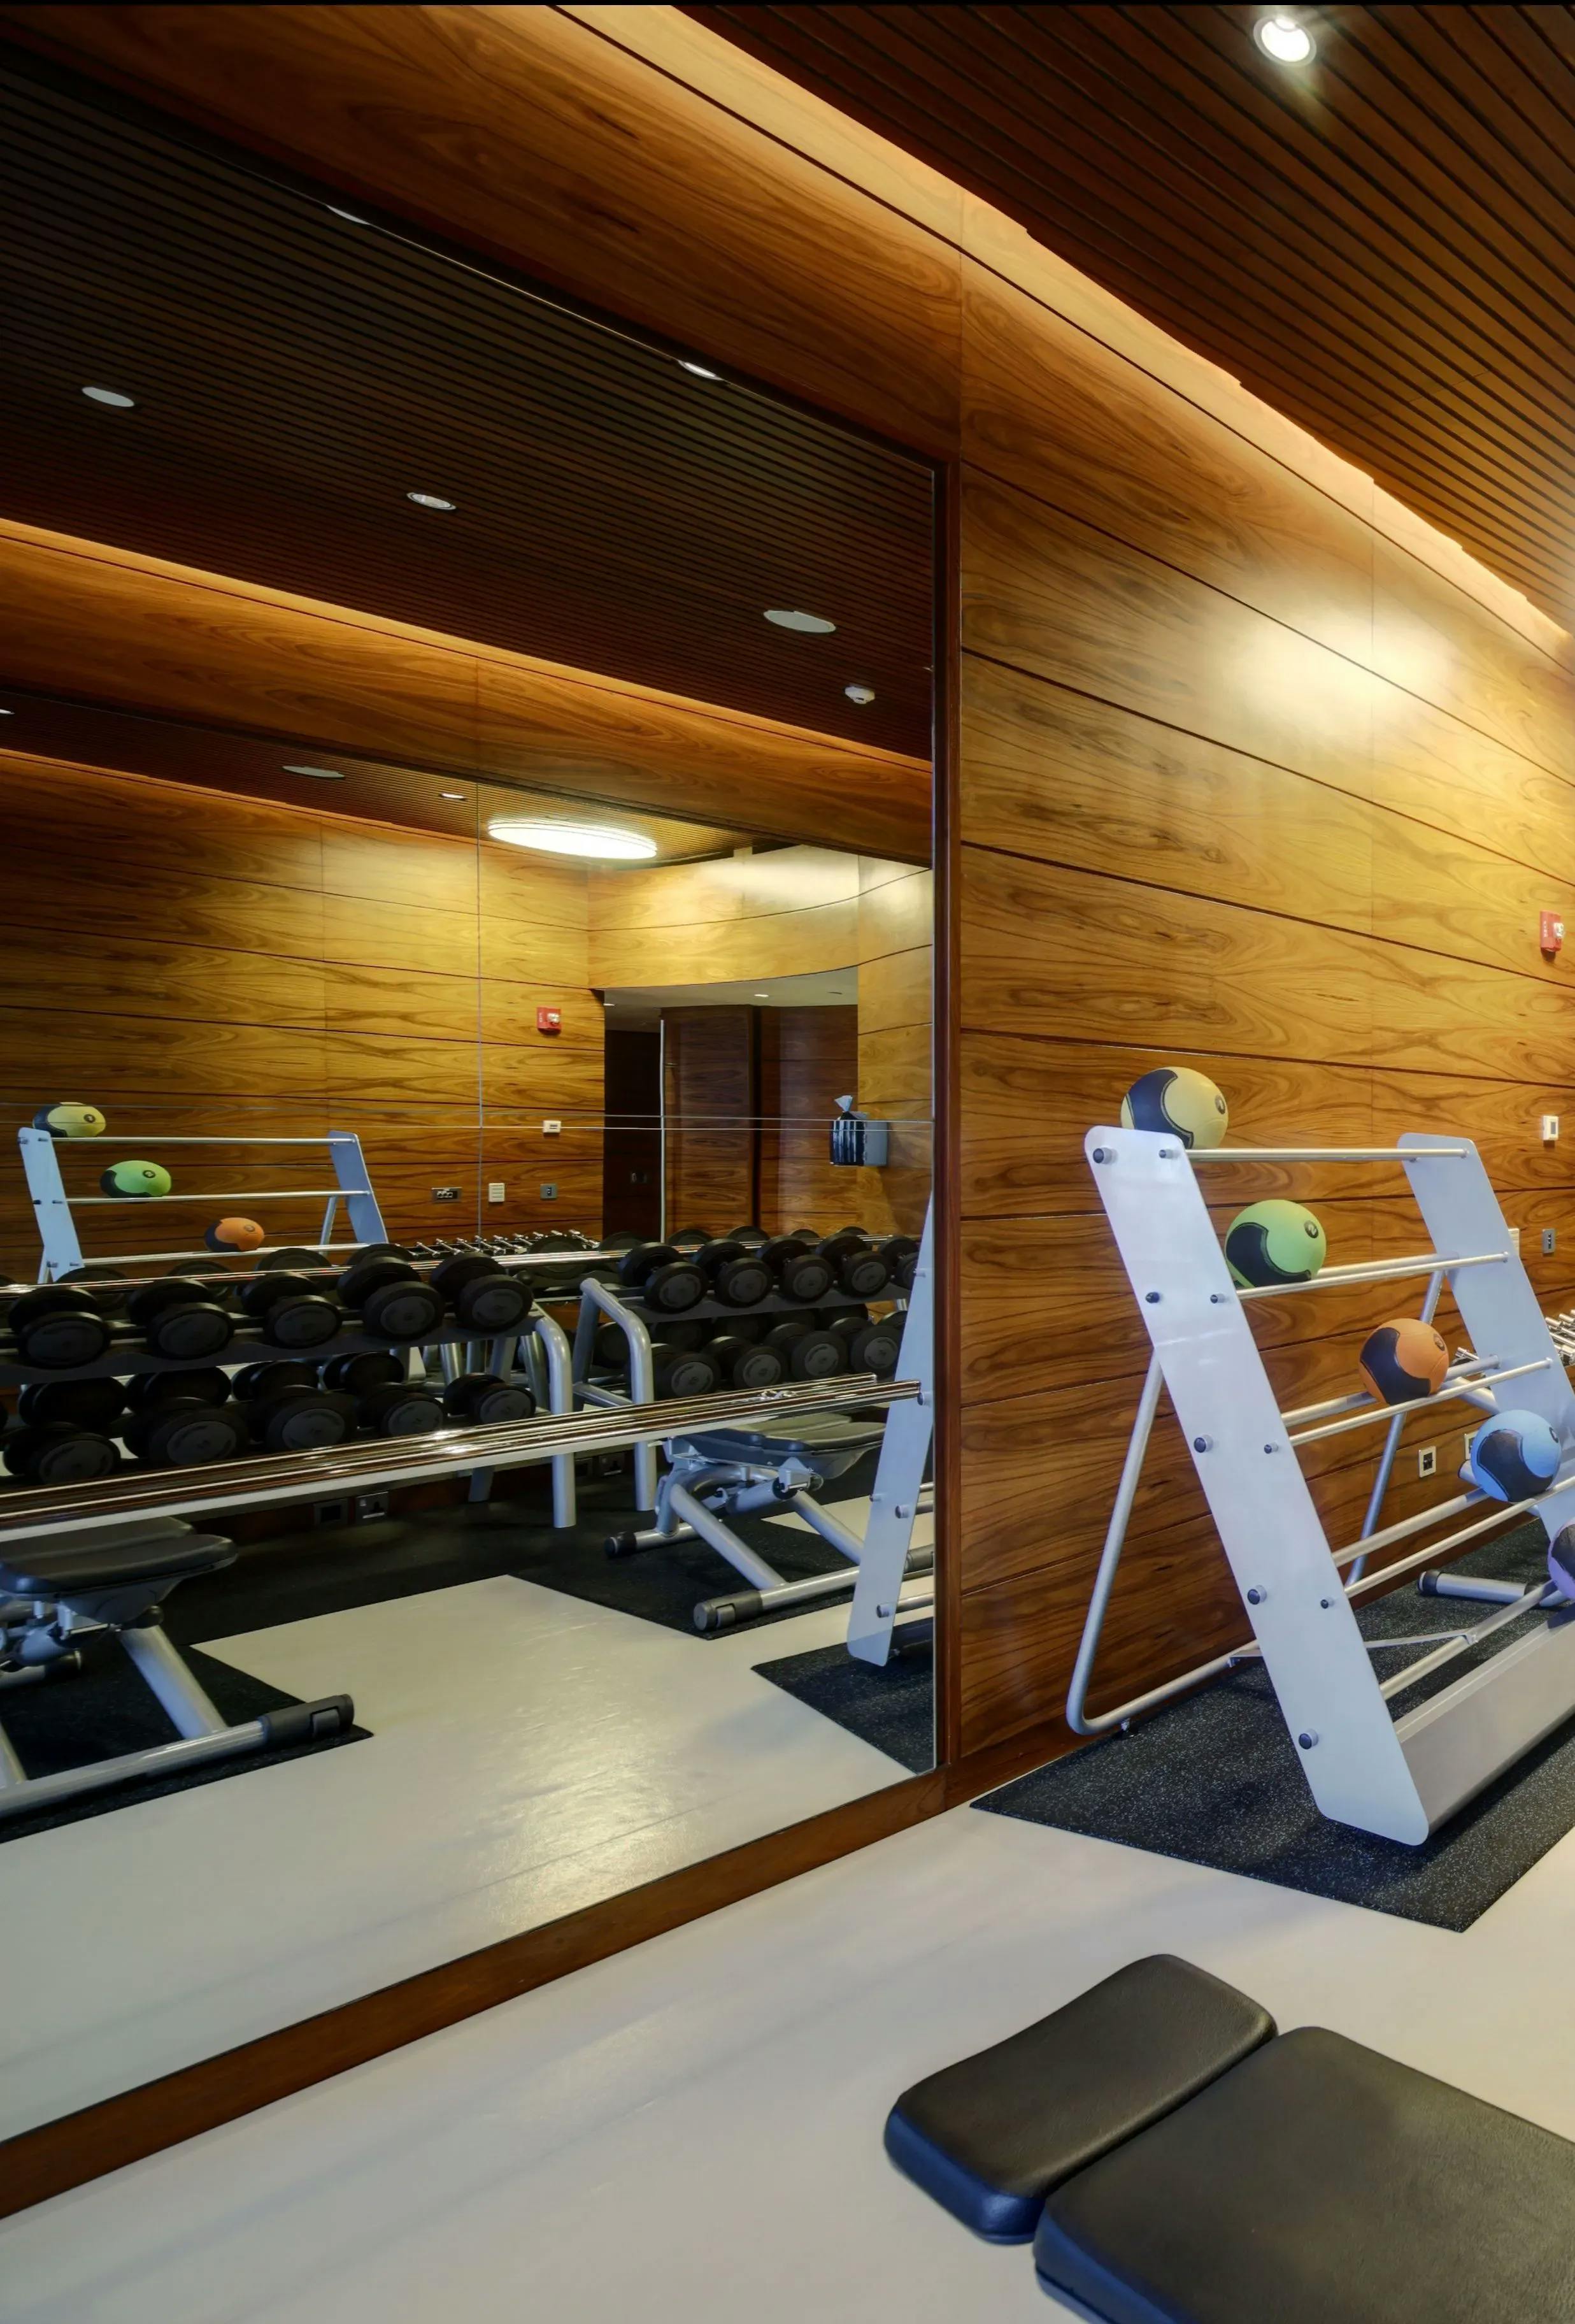 Gym setting with a focus on the gym mirror mounted on a wood wall, reflecting various gym equipment.